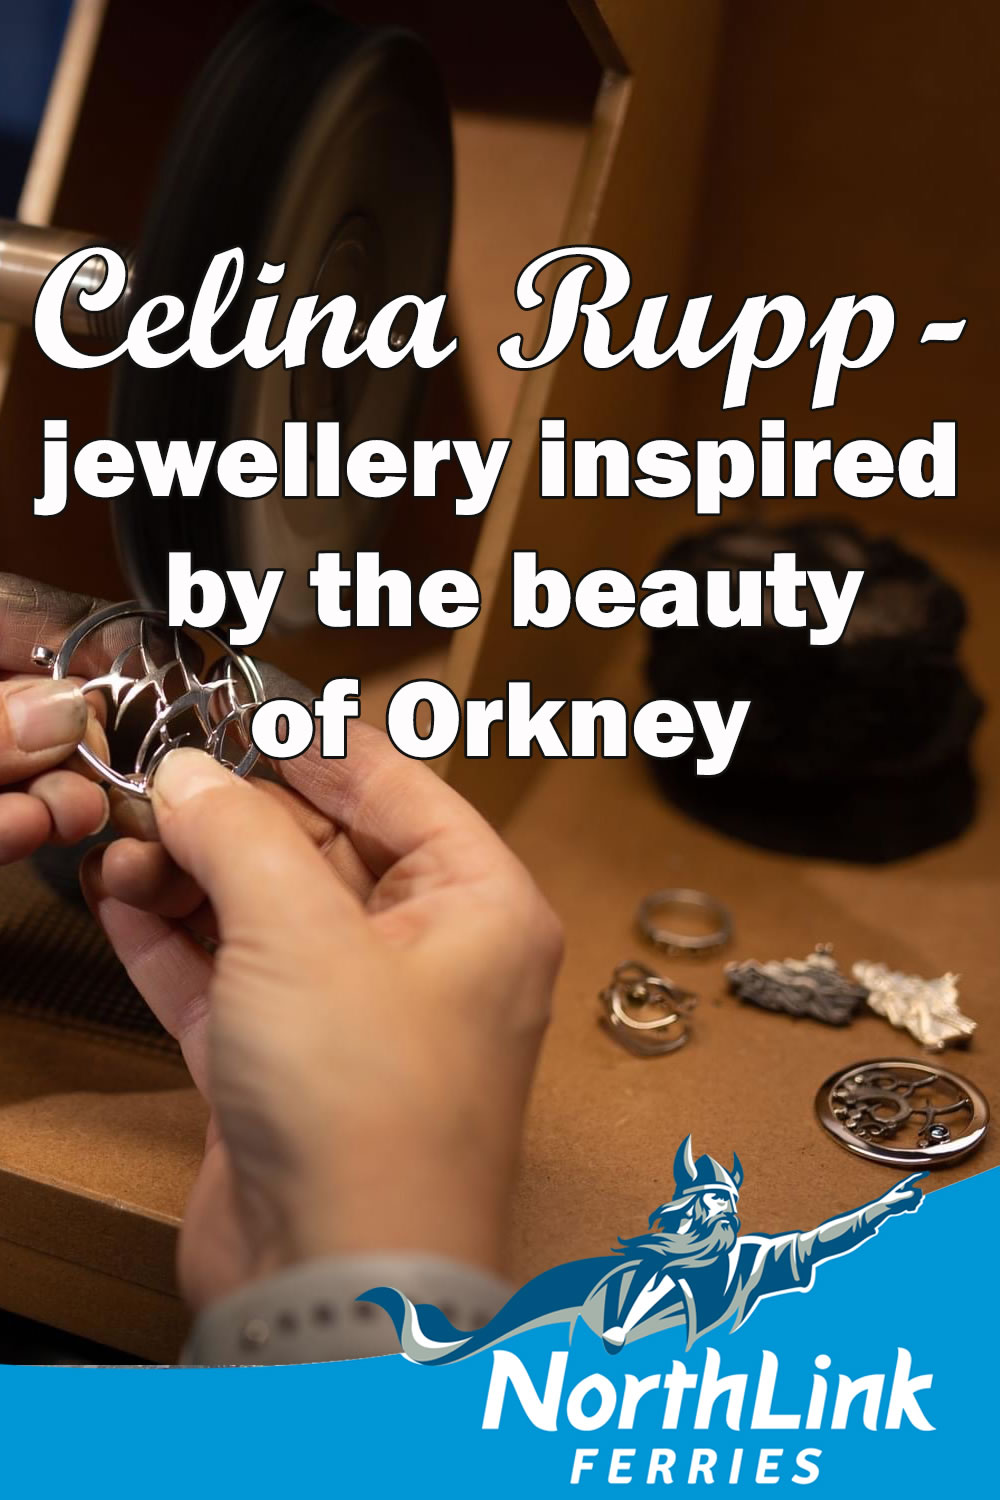 Celina Rupp – jewellery inspired by the beauty of Orkney